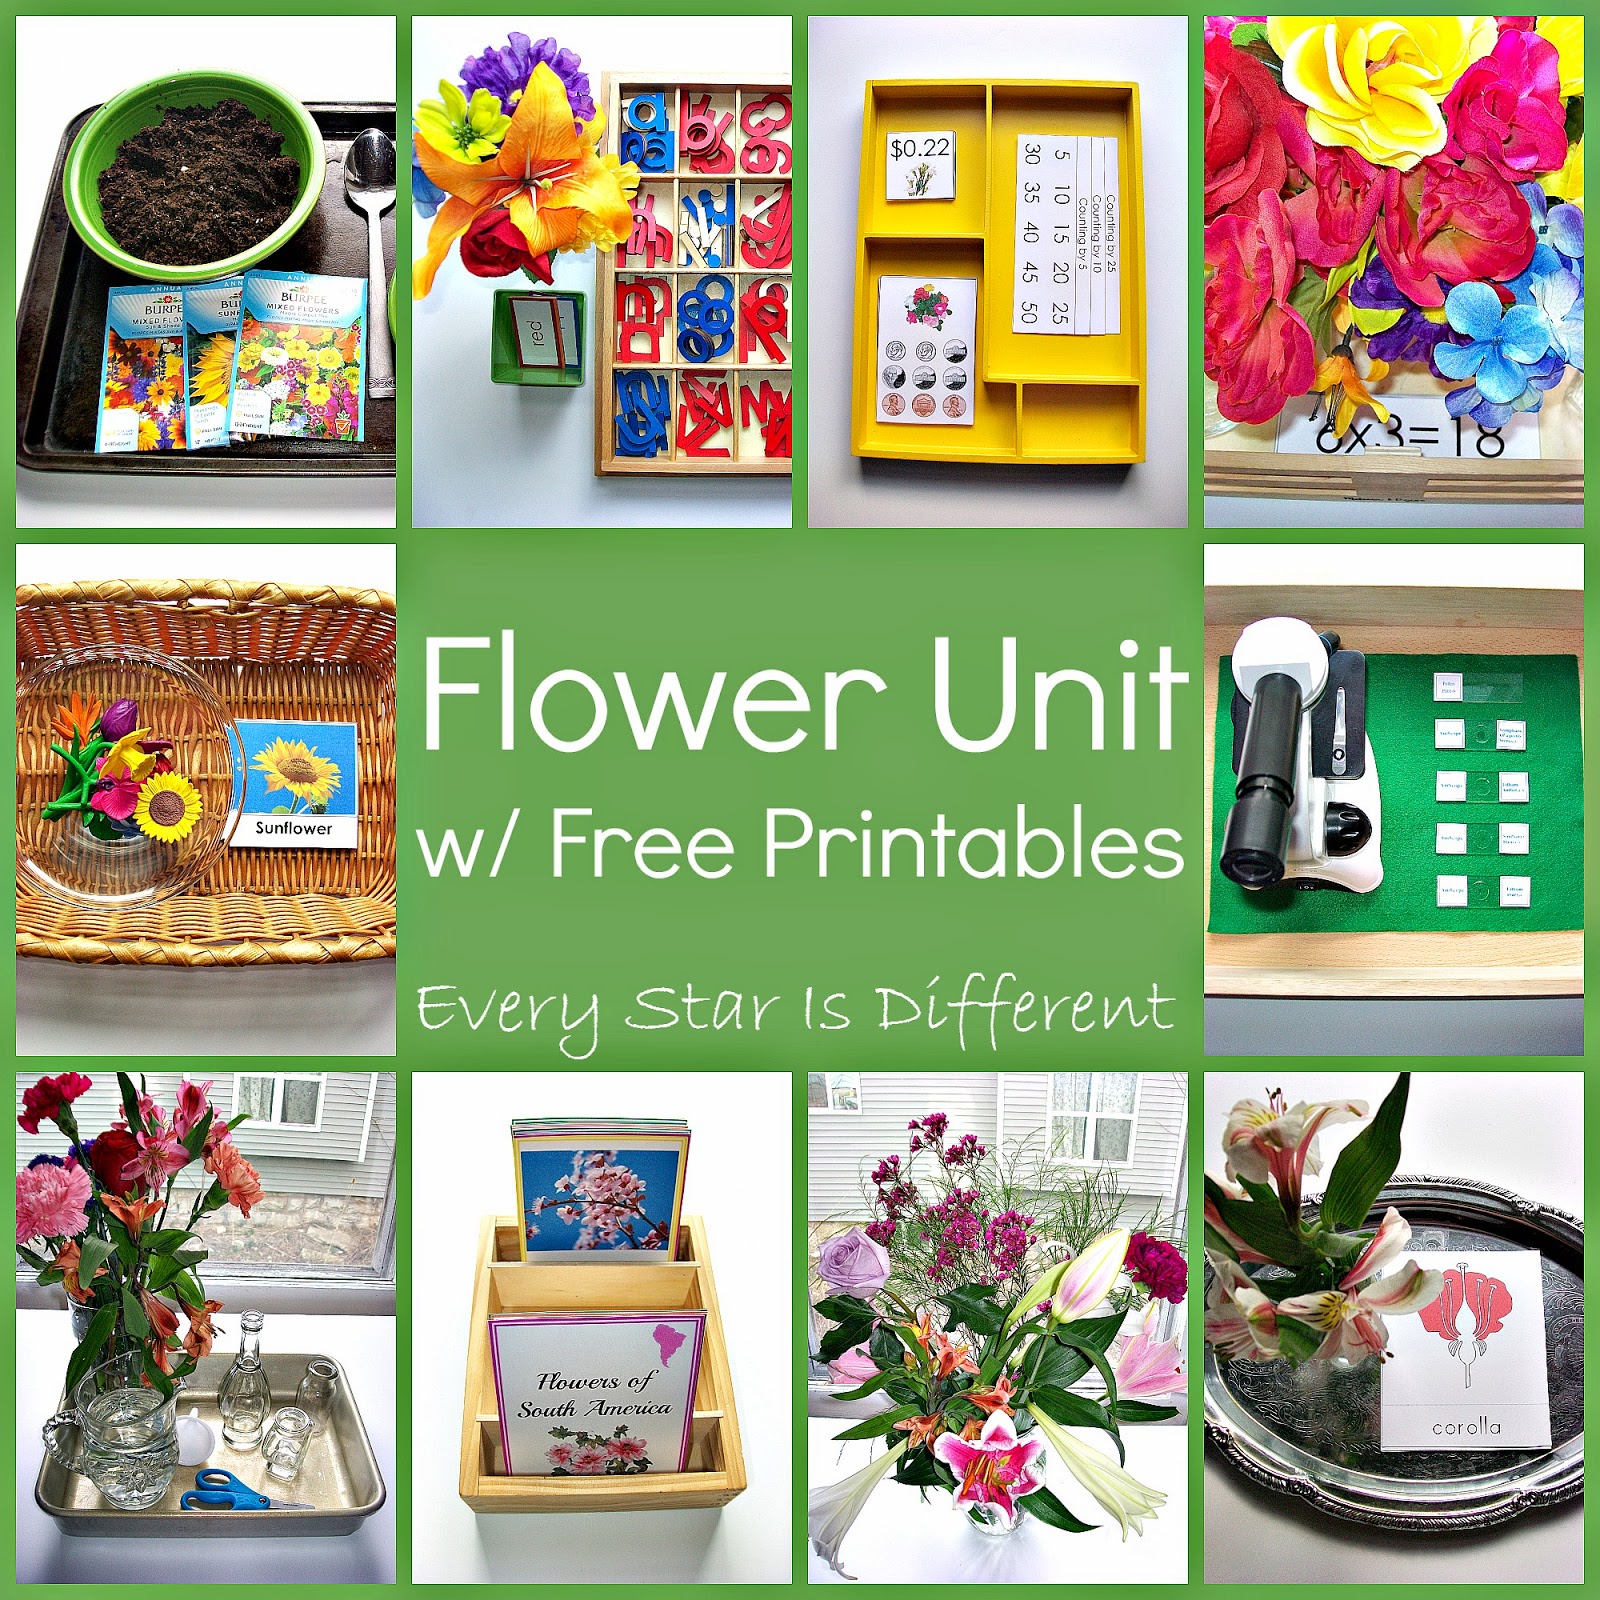 Flowers Unit with Free Printables